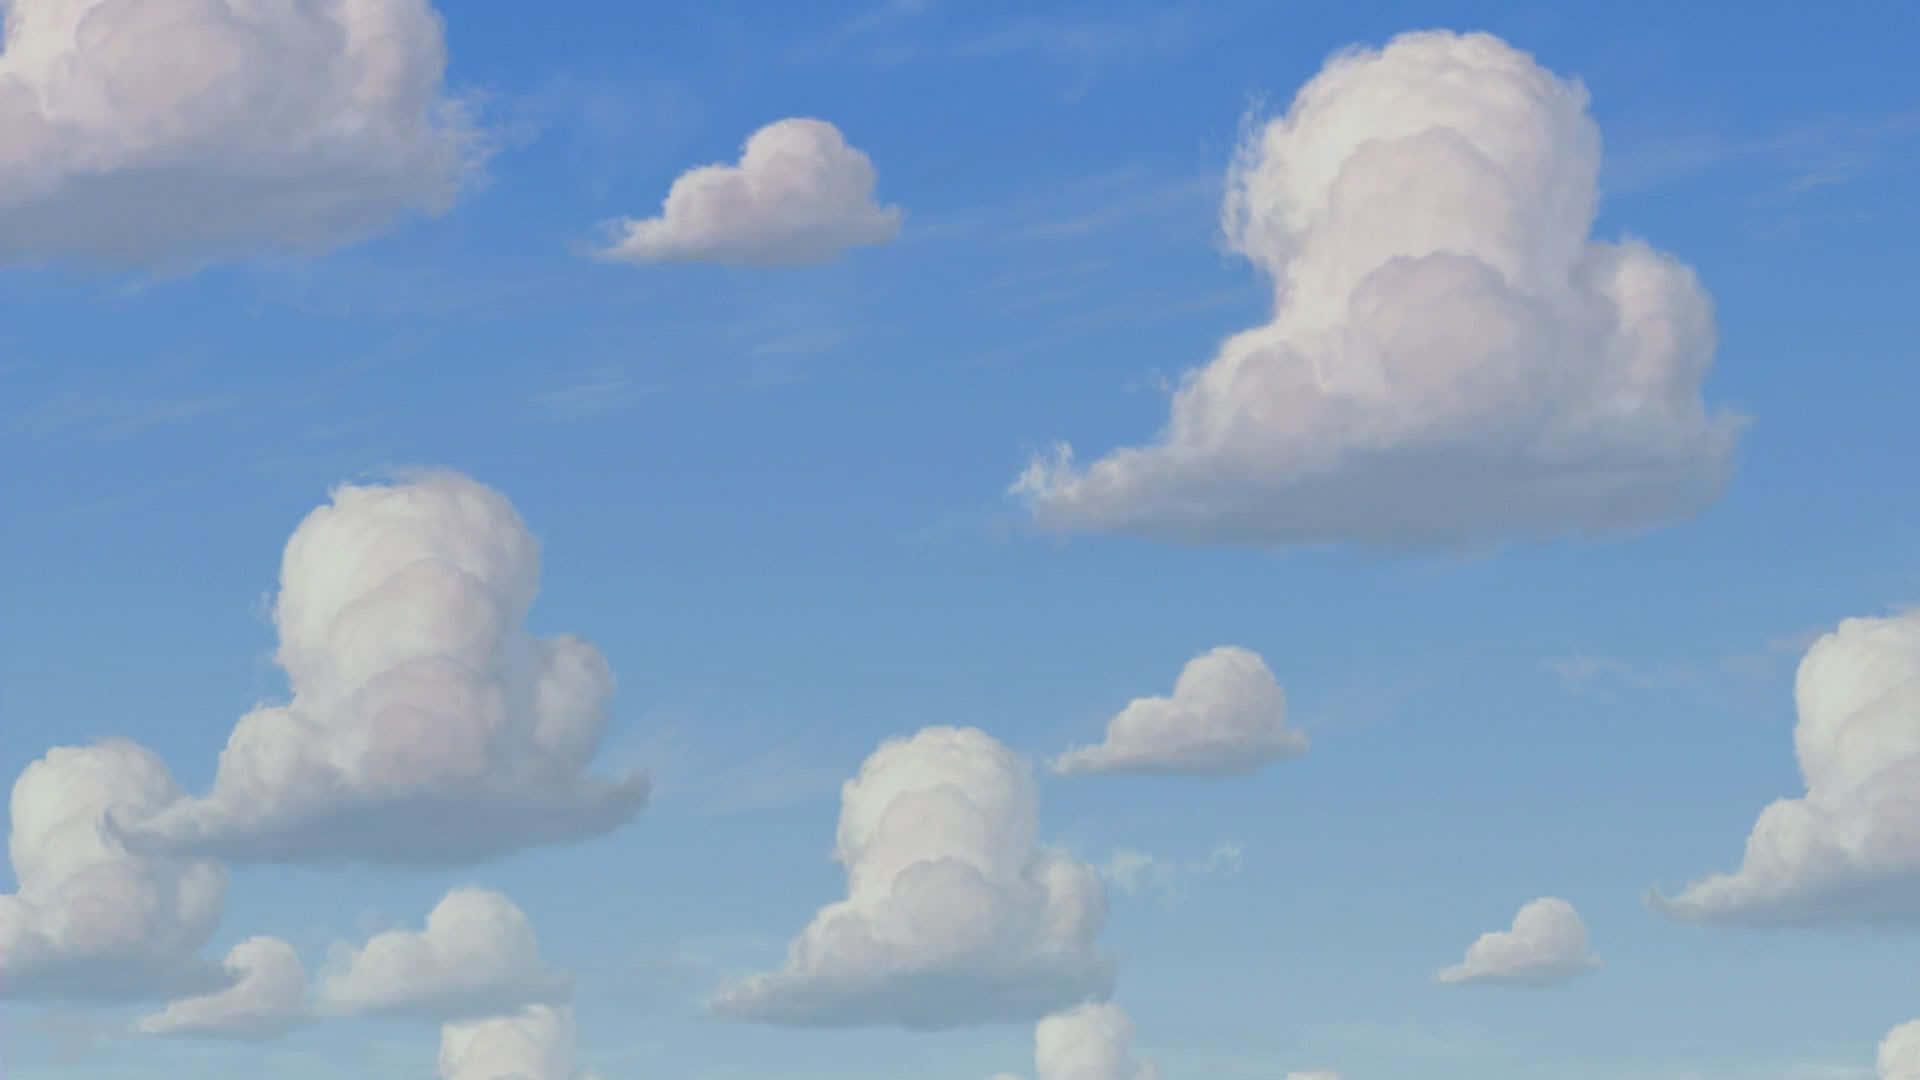 Look up in the sky and see a dream come true - A Toy Story Cloud! Wallpaper